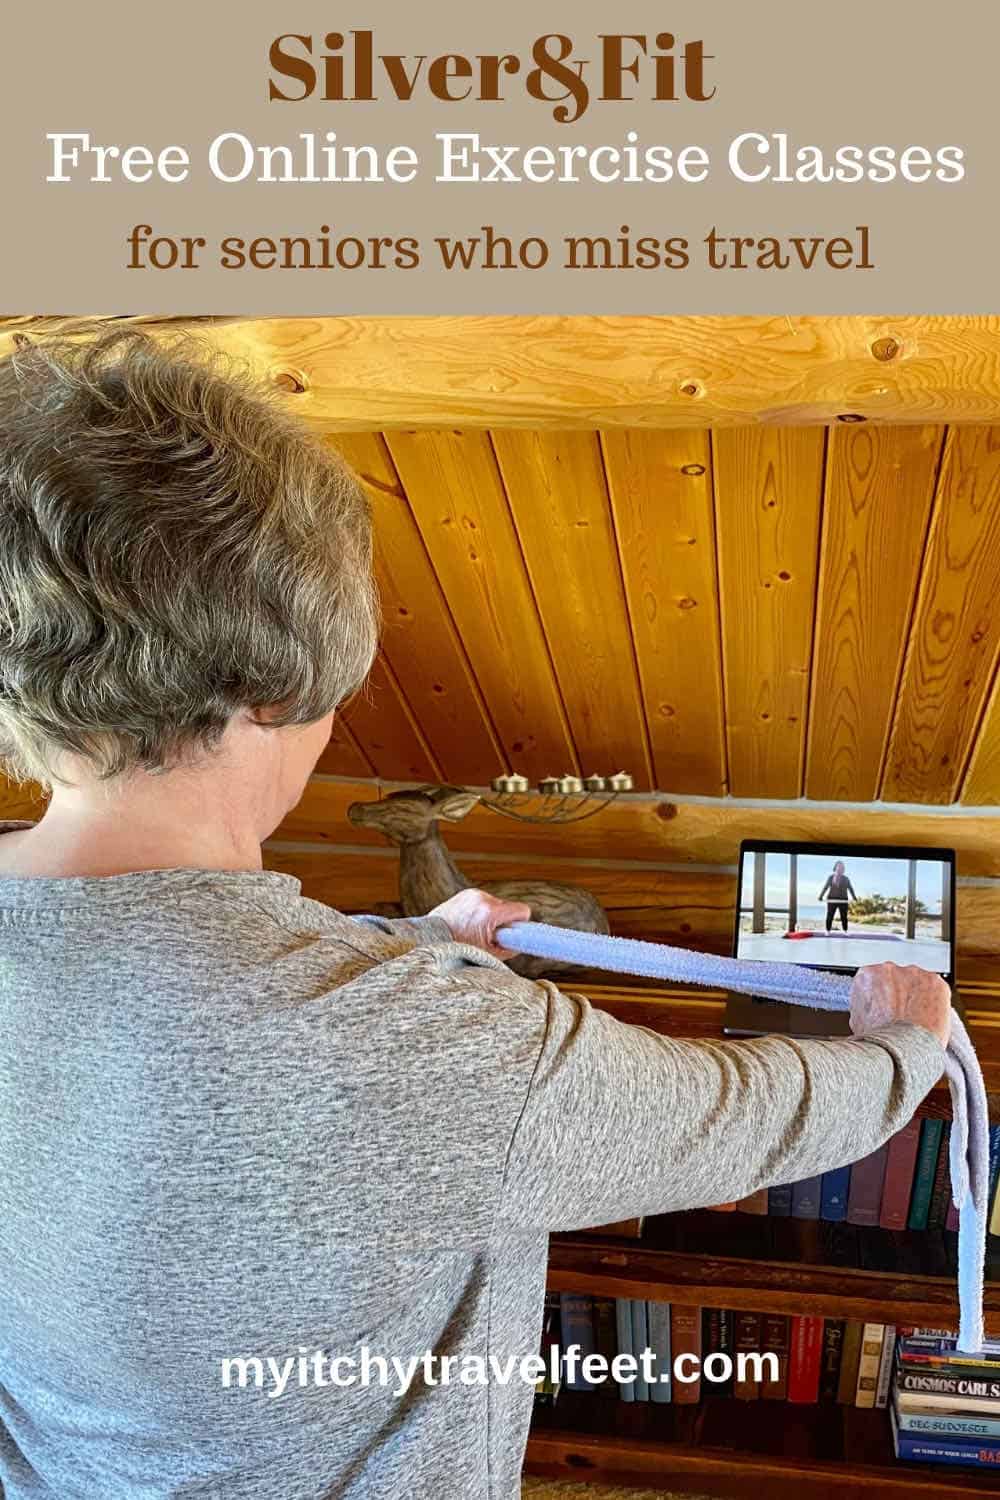 text on photo: Silver and Fit, free online exercise classes for seniors who miss travel